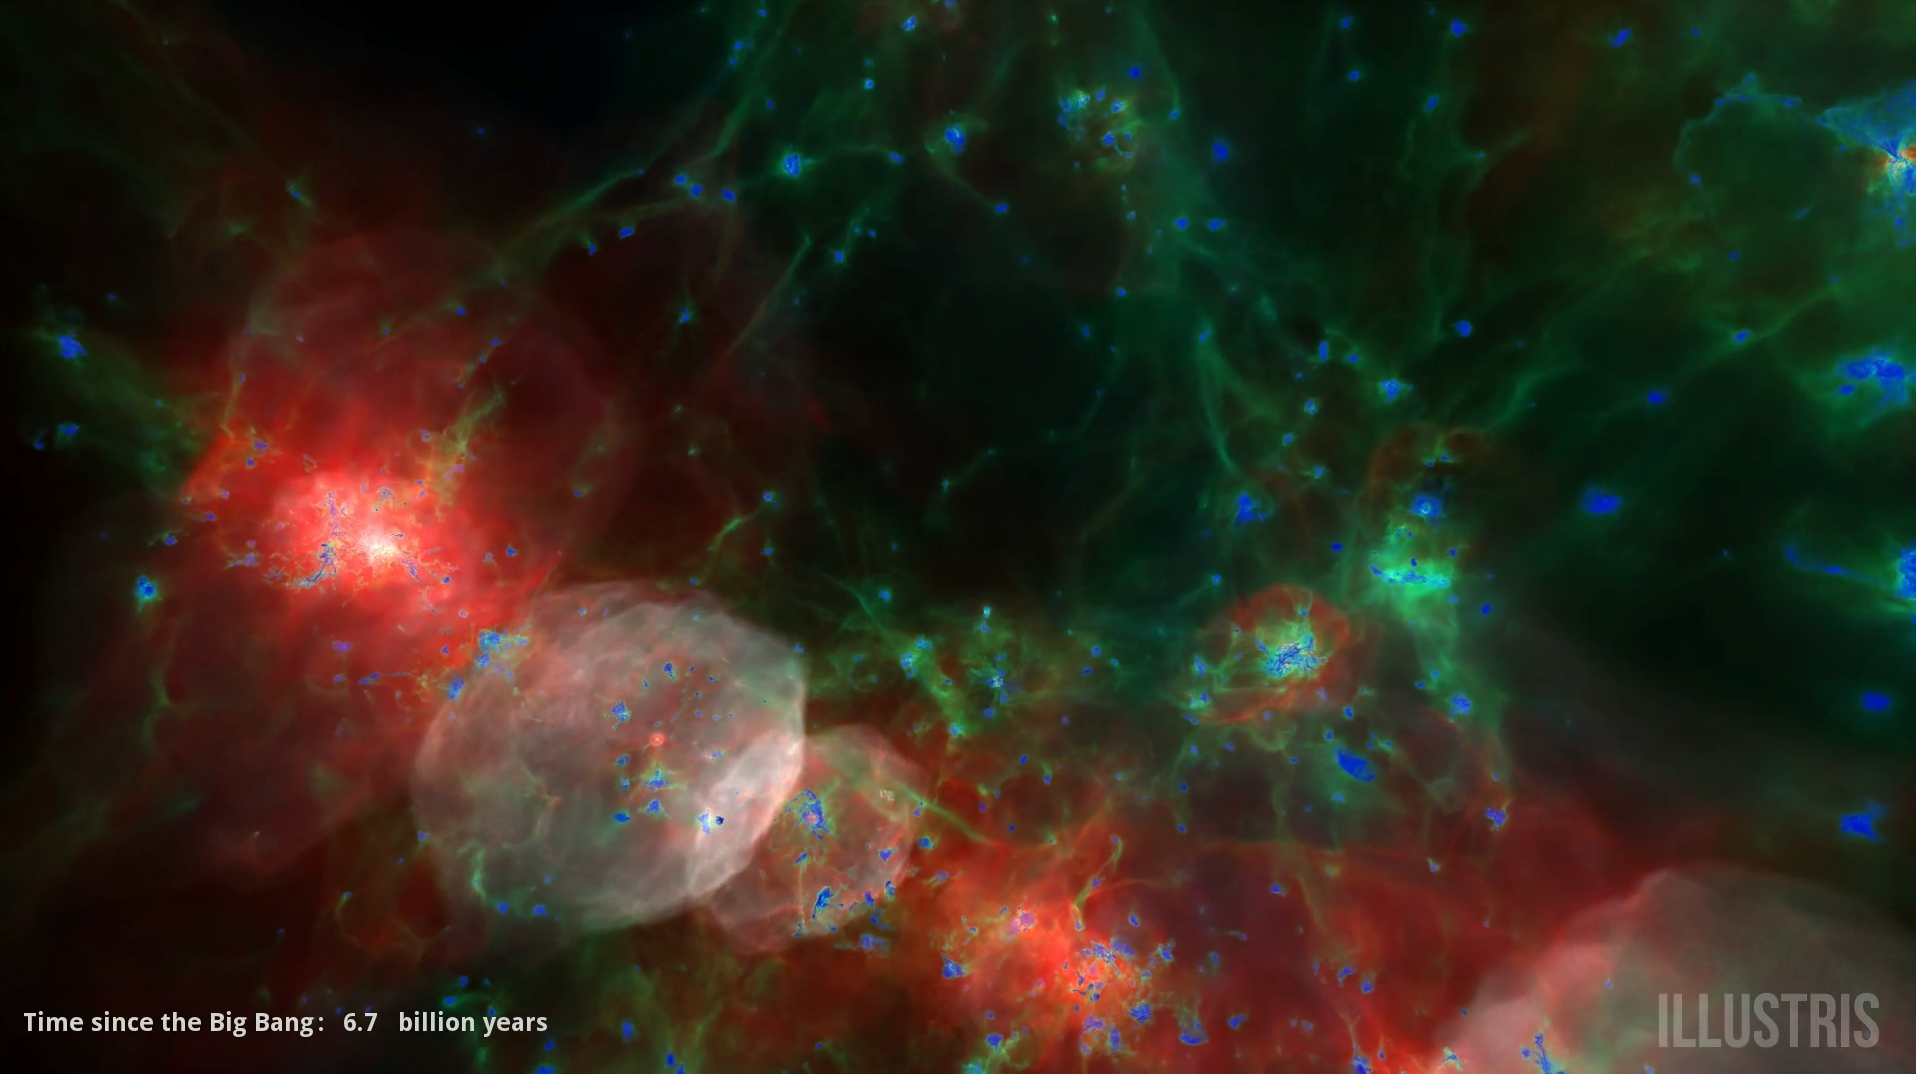 The Illustris Project is Simulated Beauty